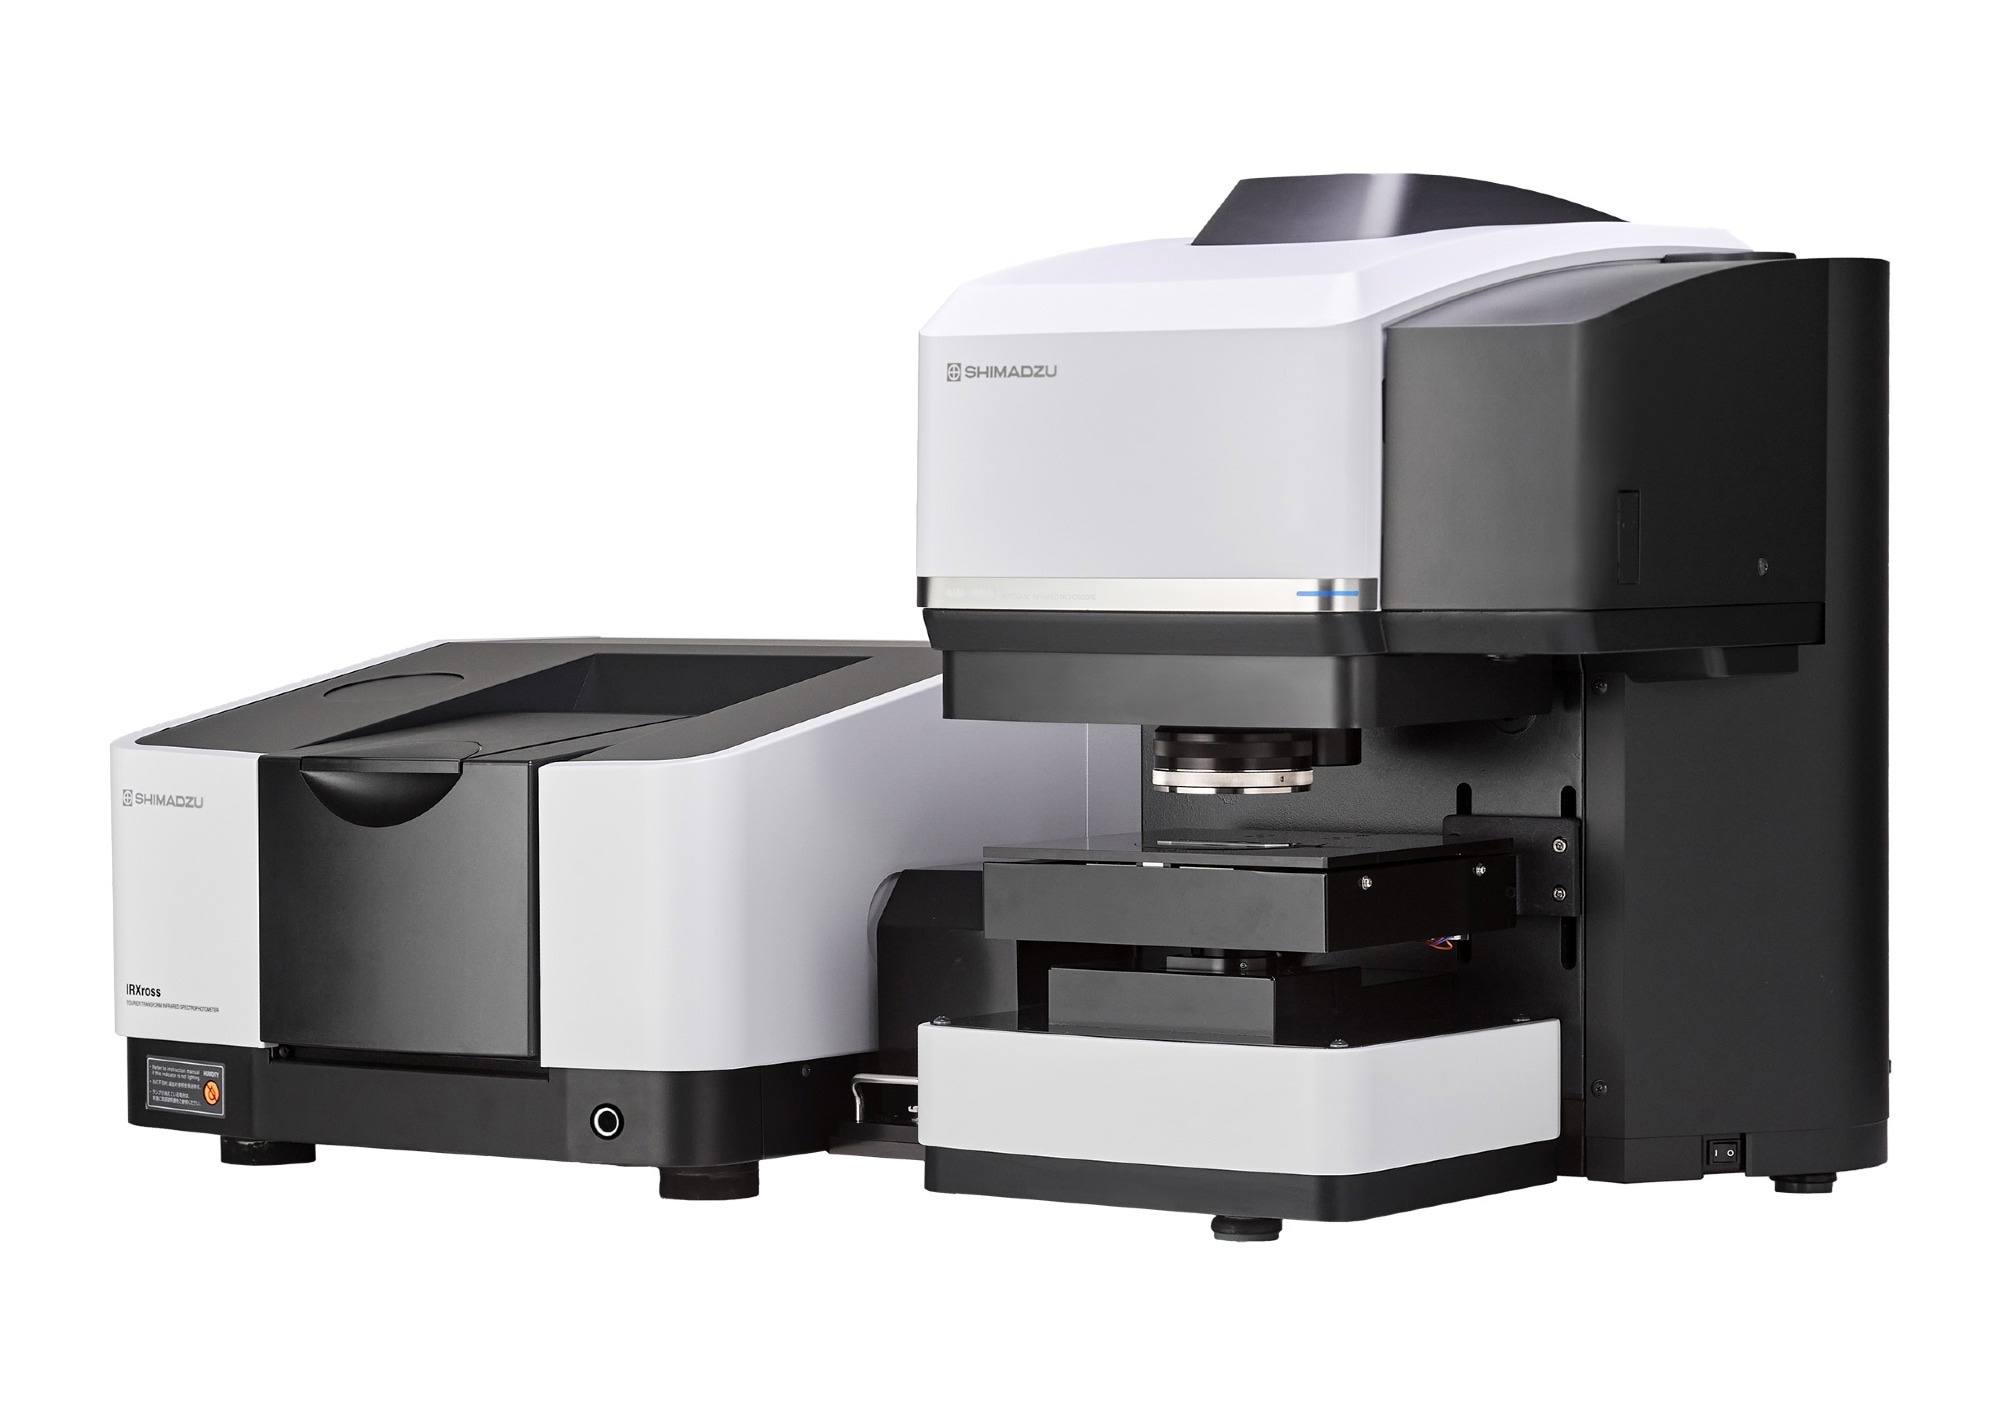 New AIMsight Infrared Microscope Maximizes Automation to Improve Microsample Analysis